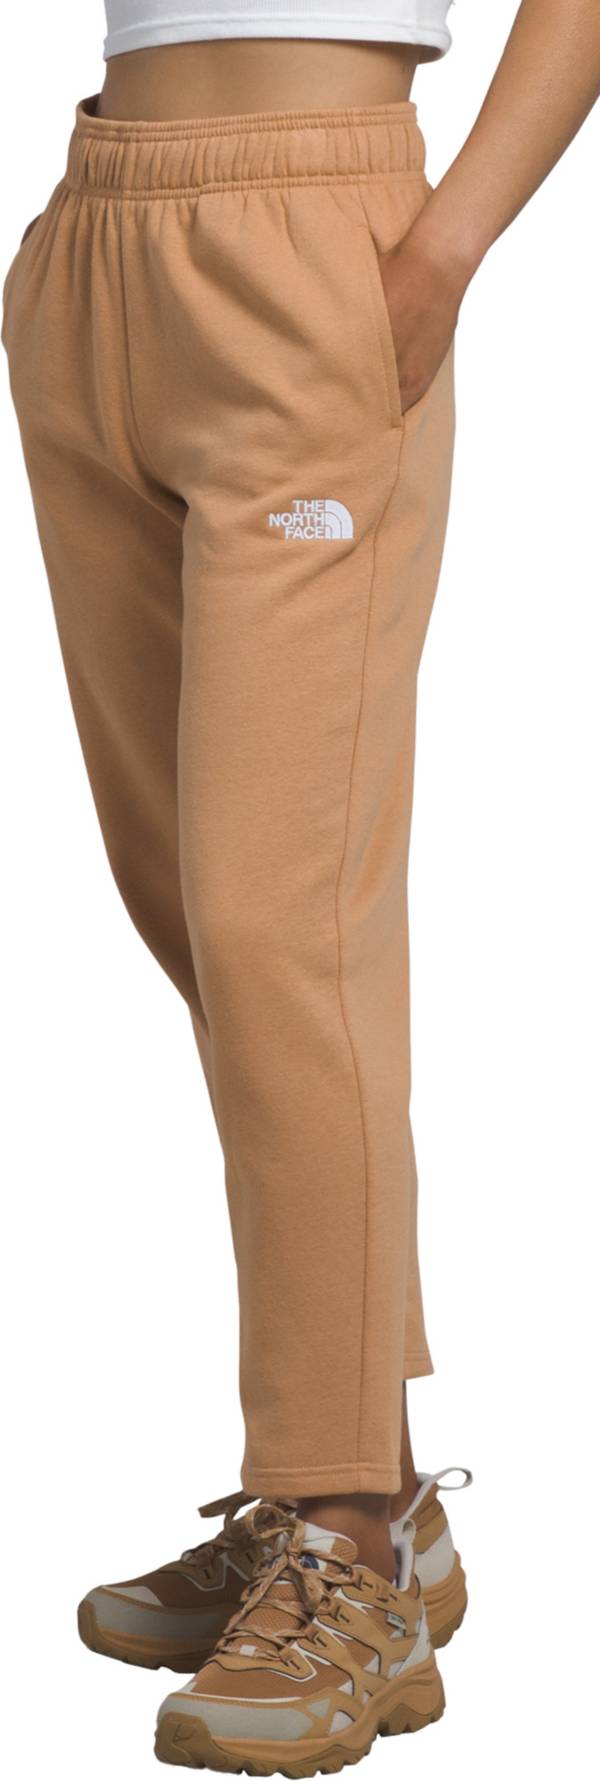 The North Face Women's Evolution Cocoon Sweatpants product image